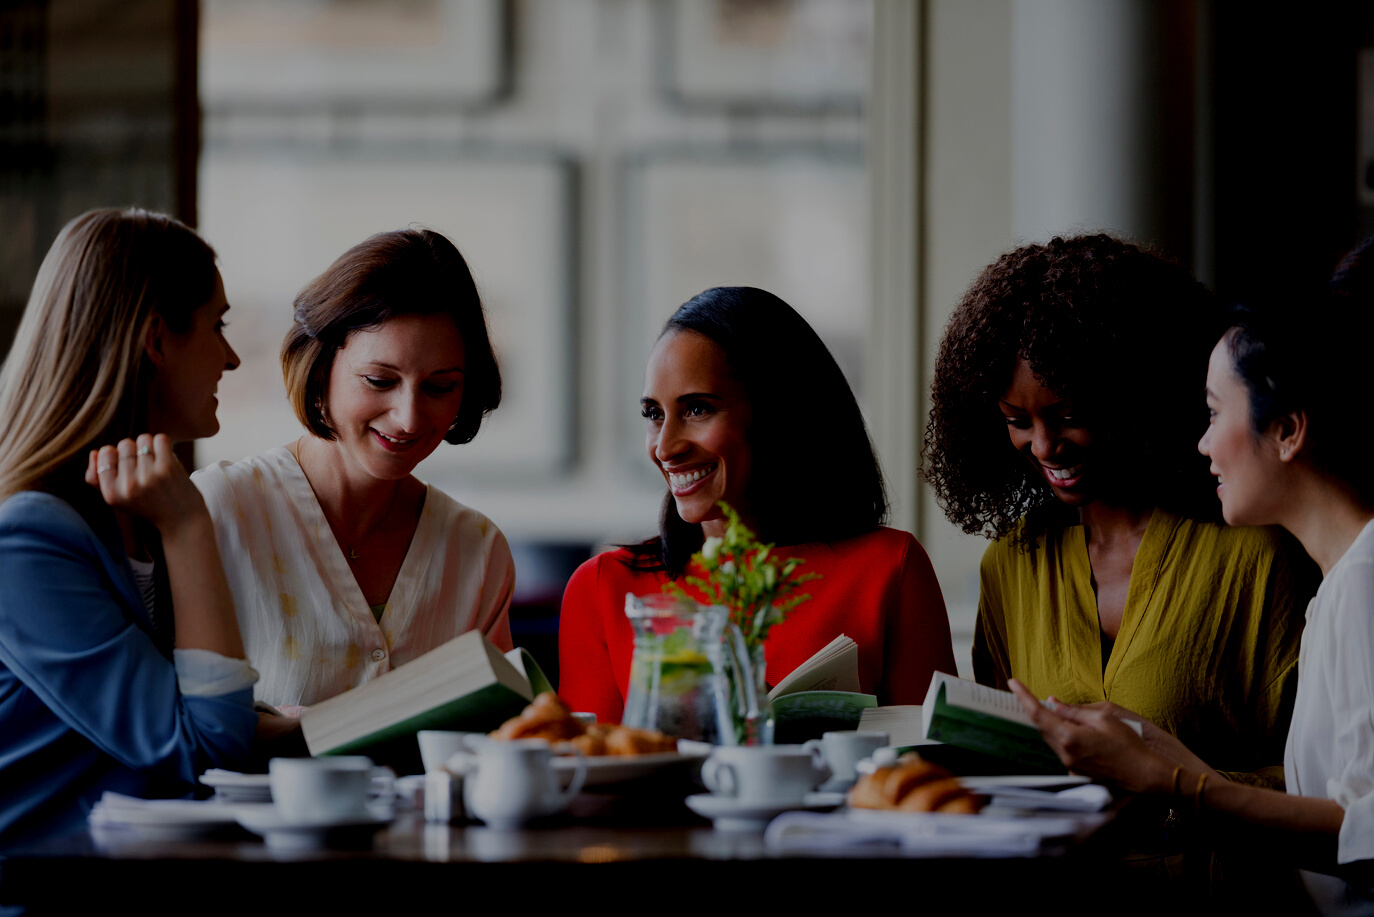 Women friends discussing book club book at restaurant table.